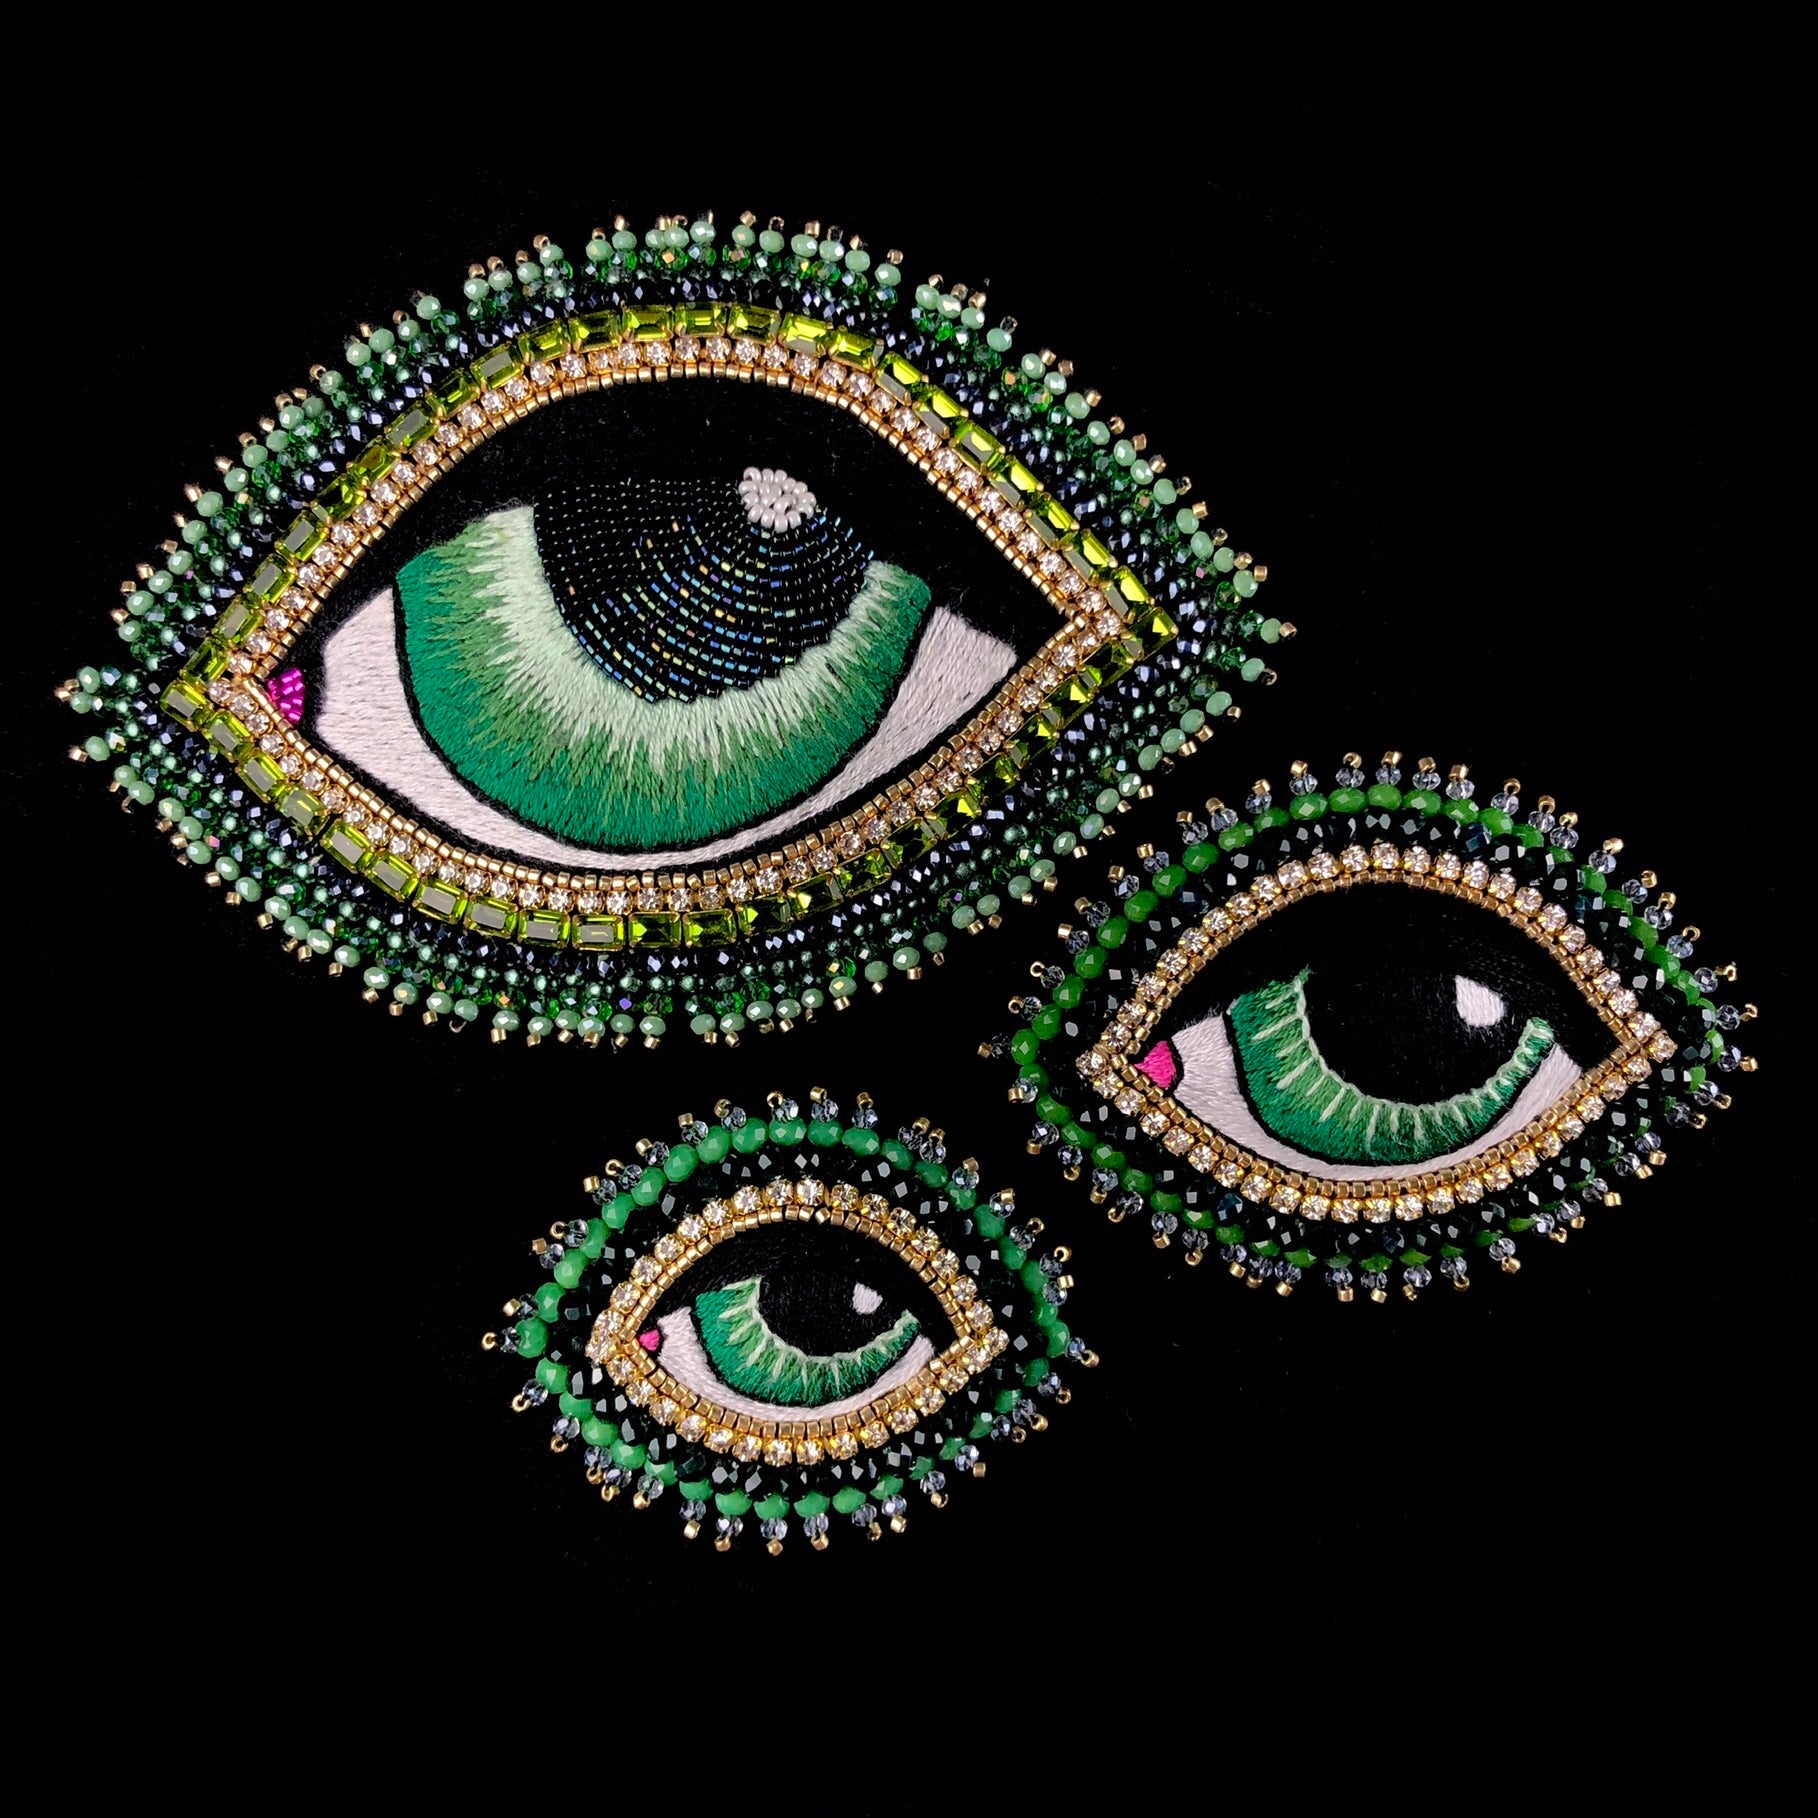 Extra Large Eye Brooch shown with large and small size options